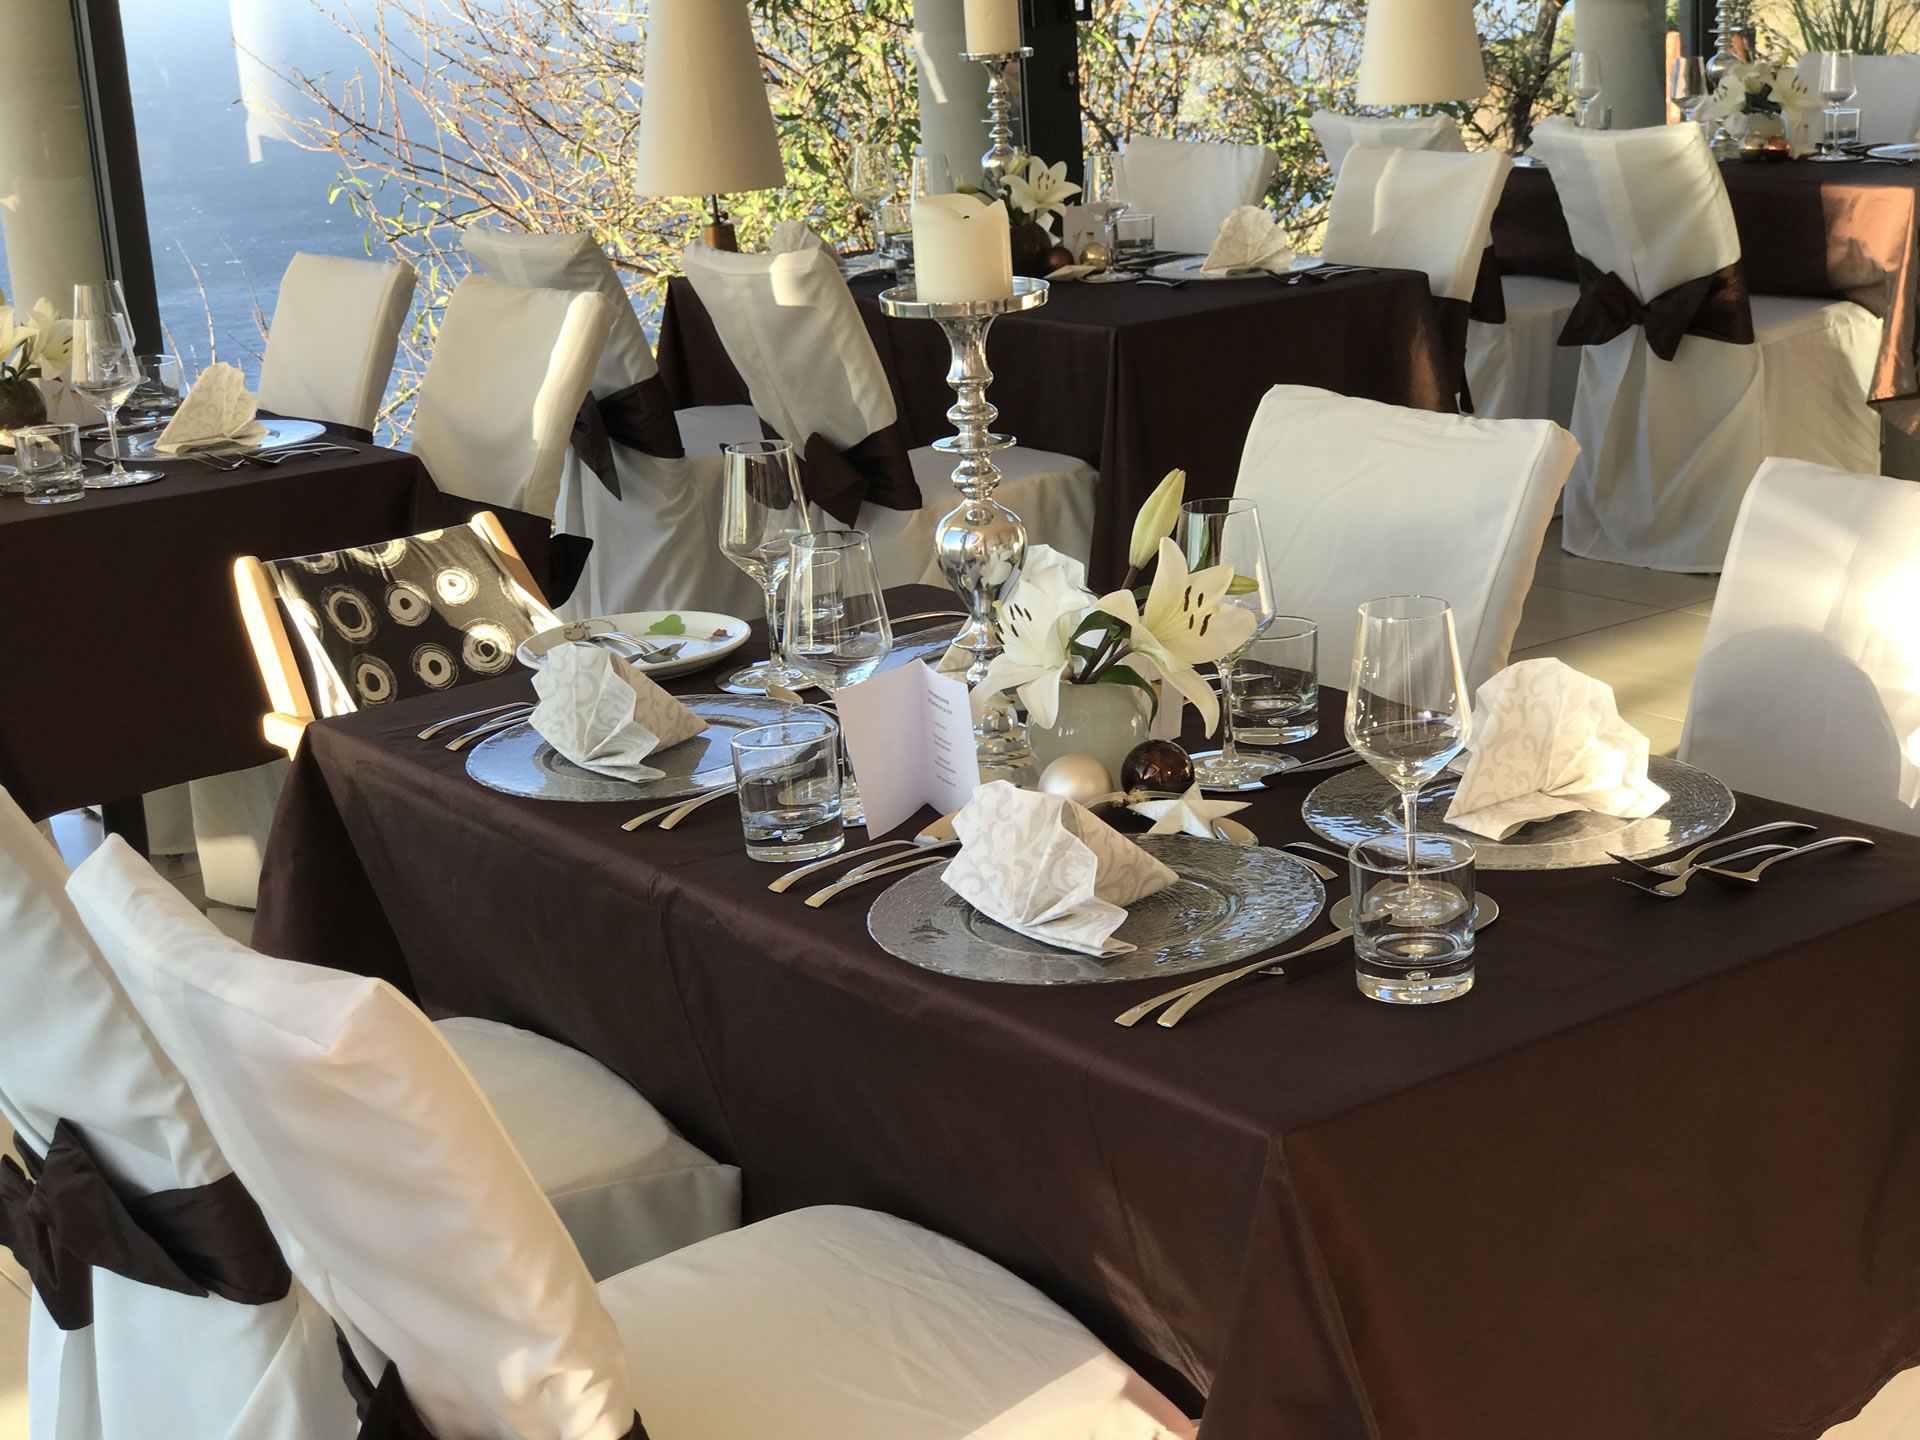 Jardin de la Paz private events with table and view